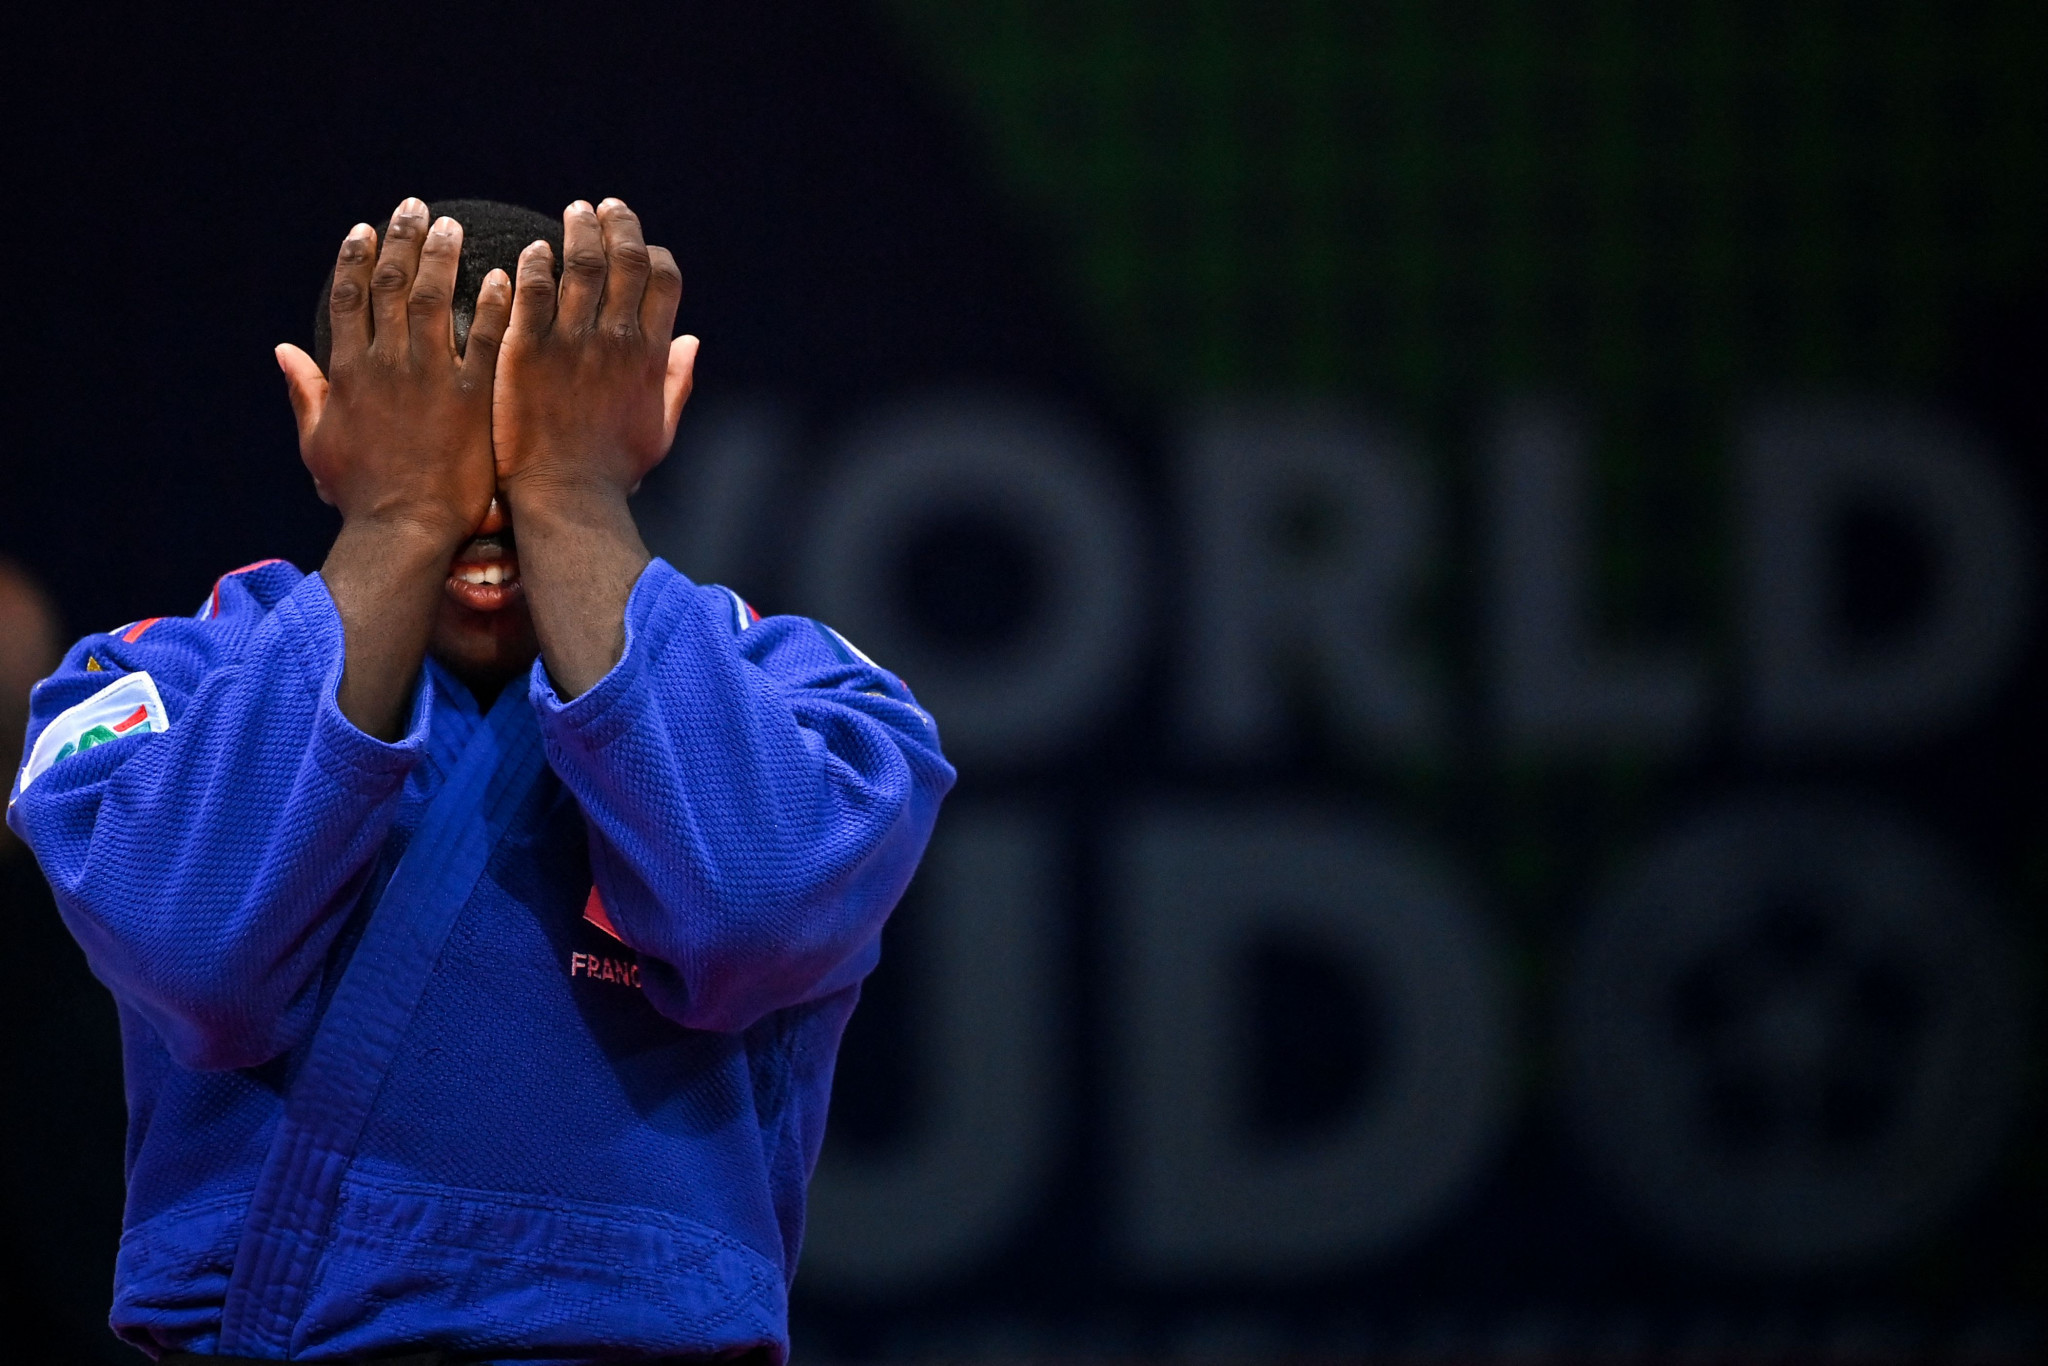 France, who finished second at last year's World Championships, had a torrid day as none of their judoka finished on the podium ©Getty Images